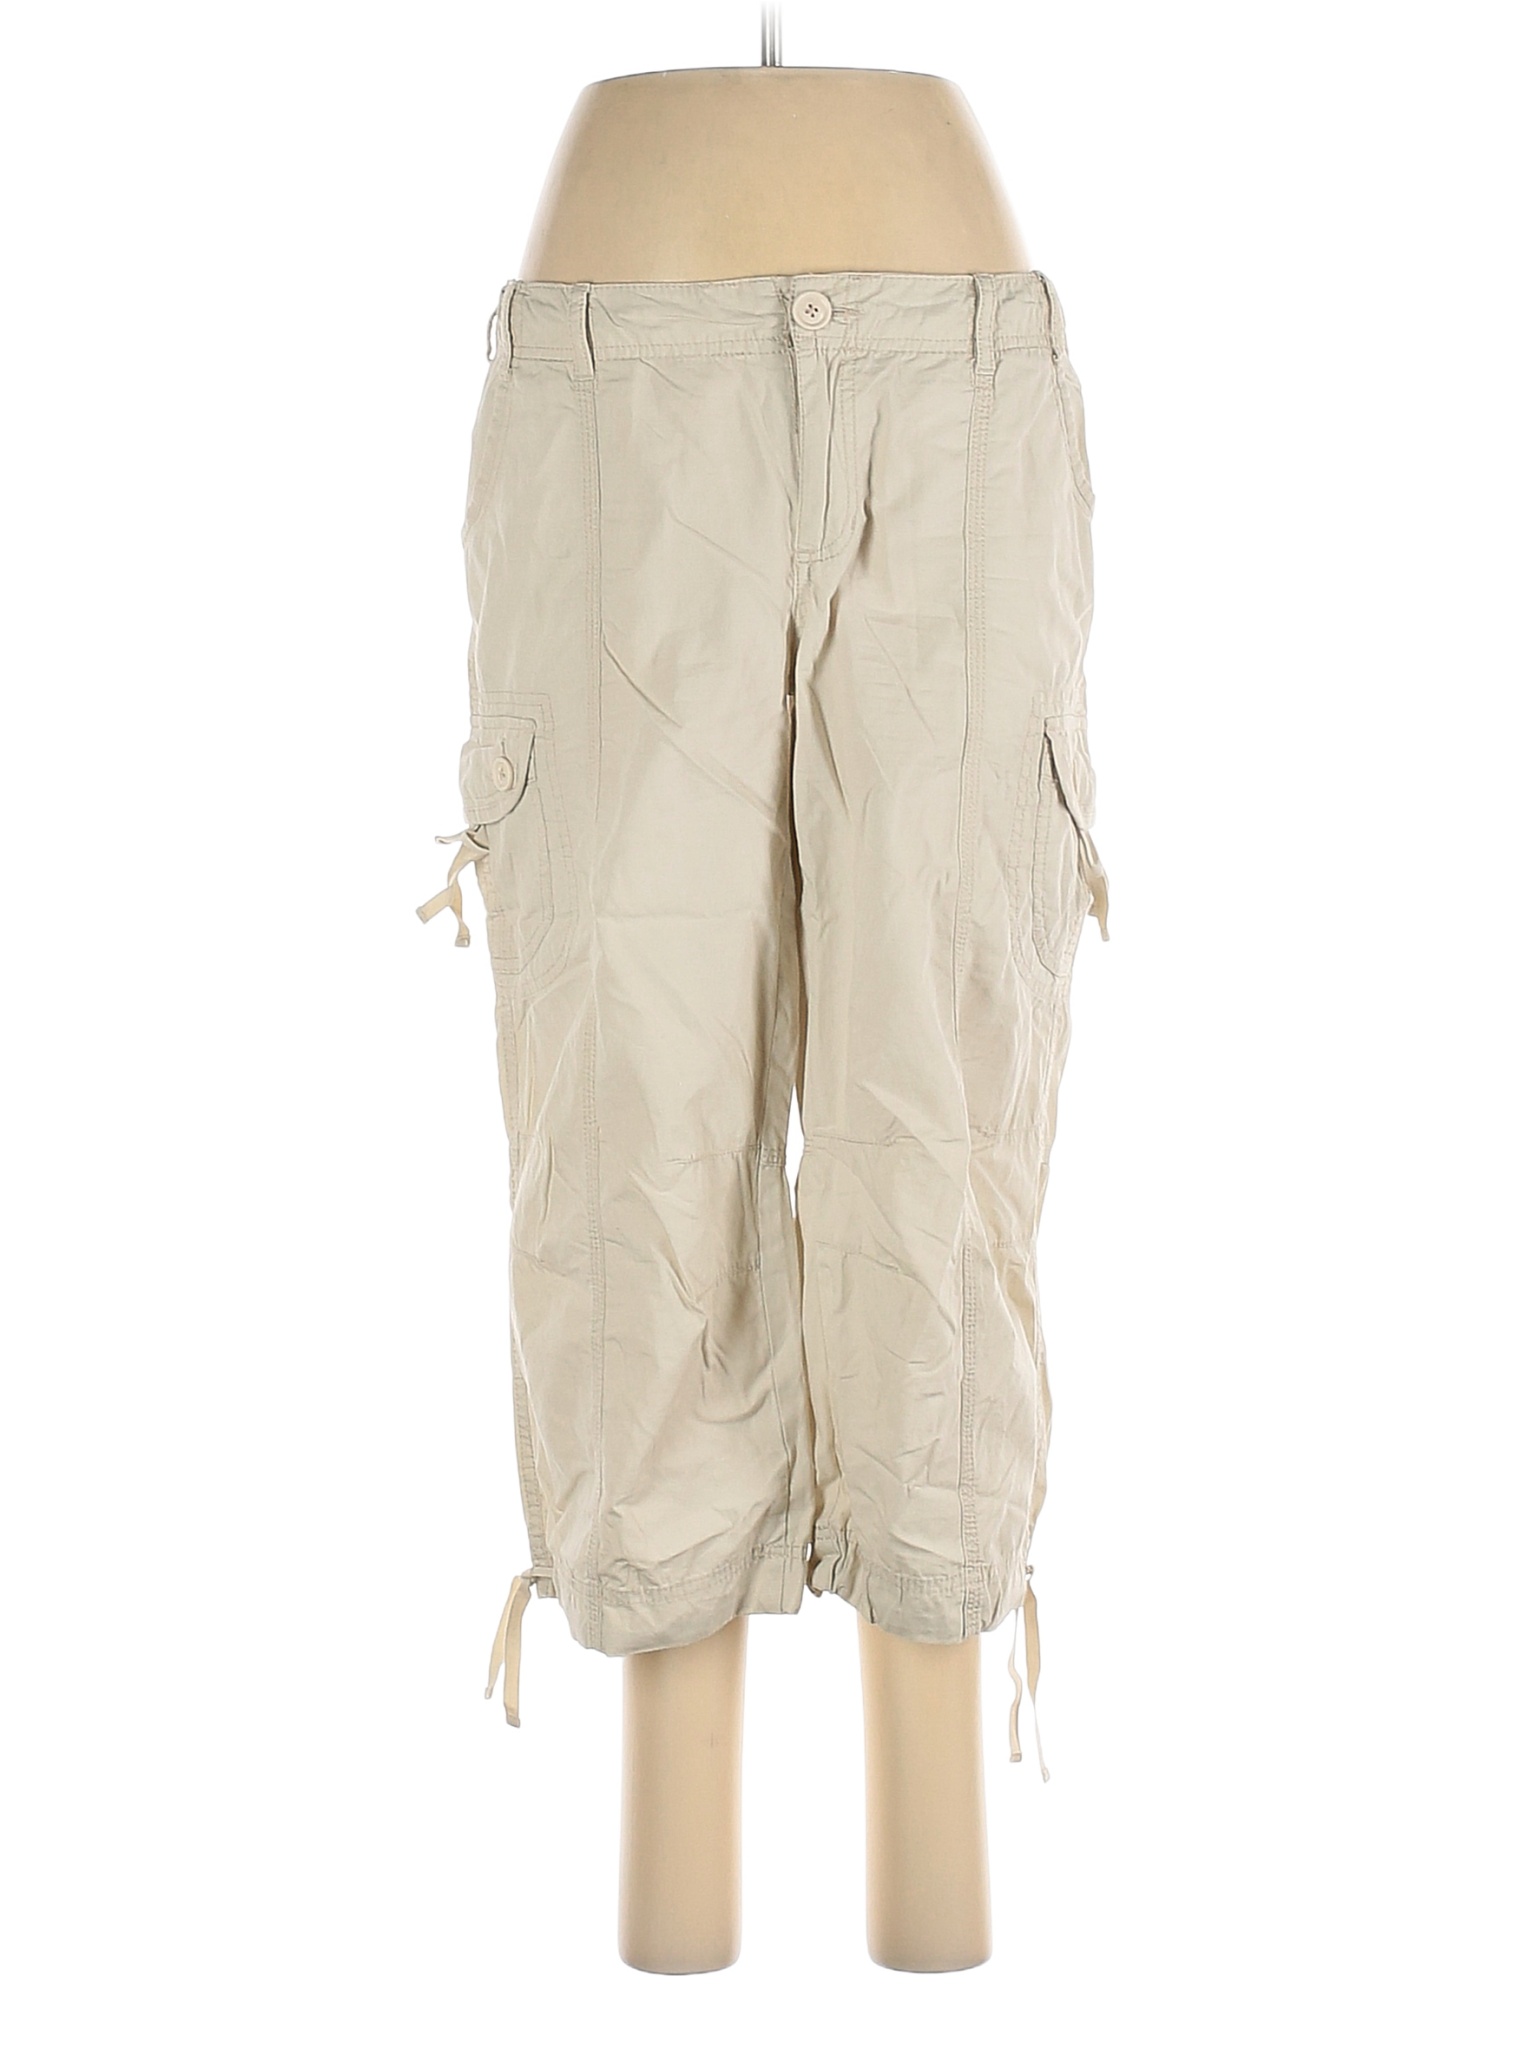 a.n.a. A New Approach 100% Cotton Solid Colored Ivory Cargo Pants Size ...